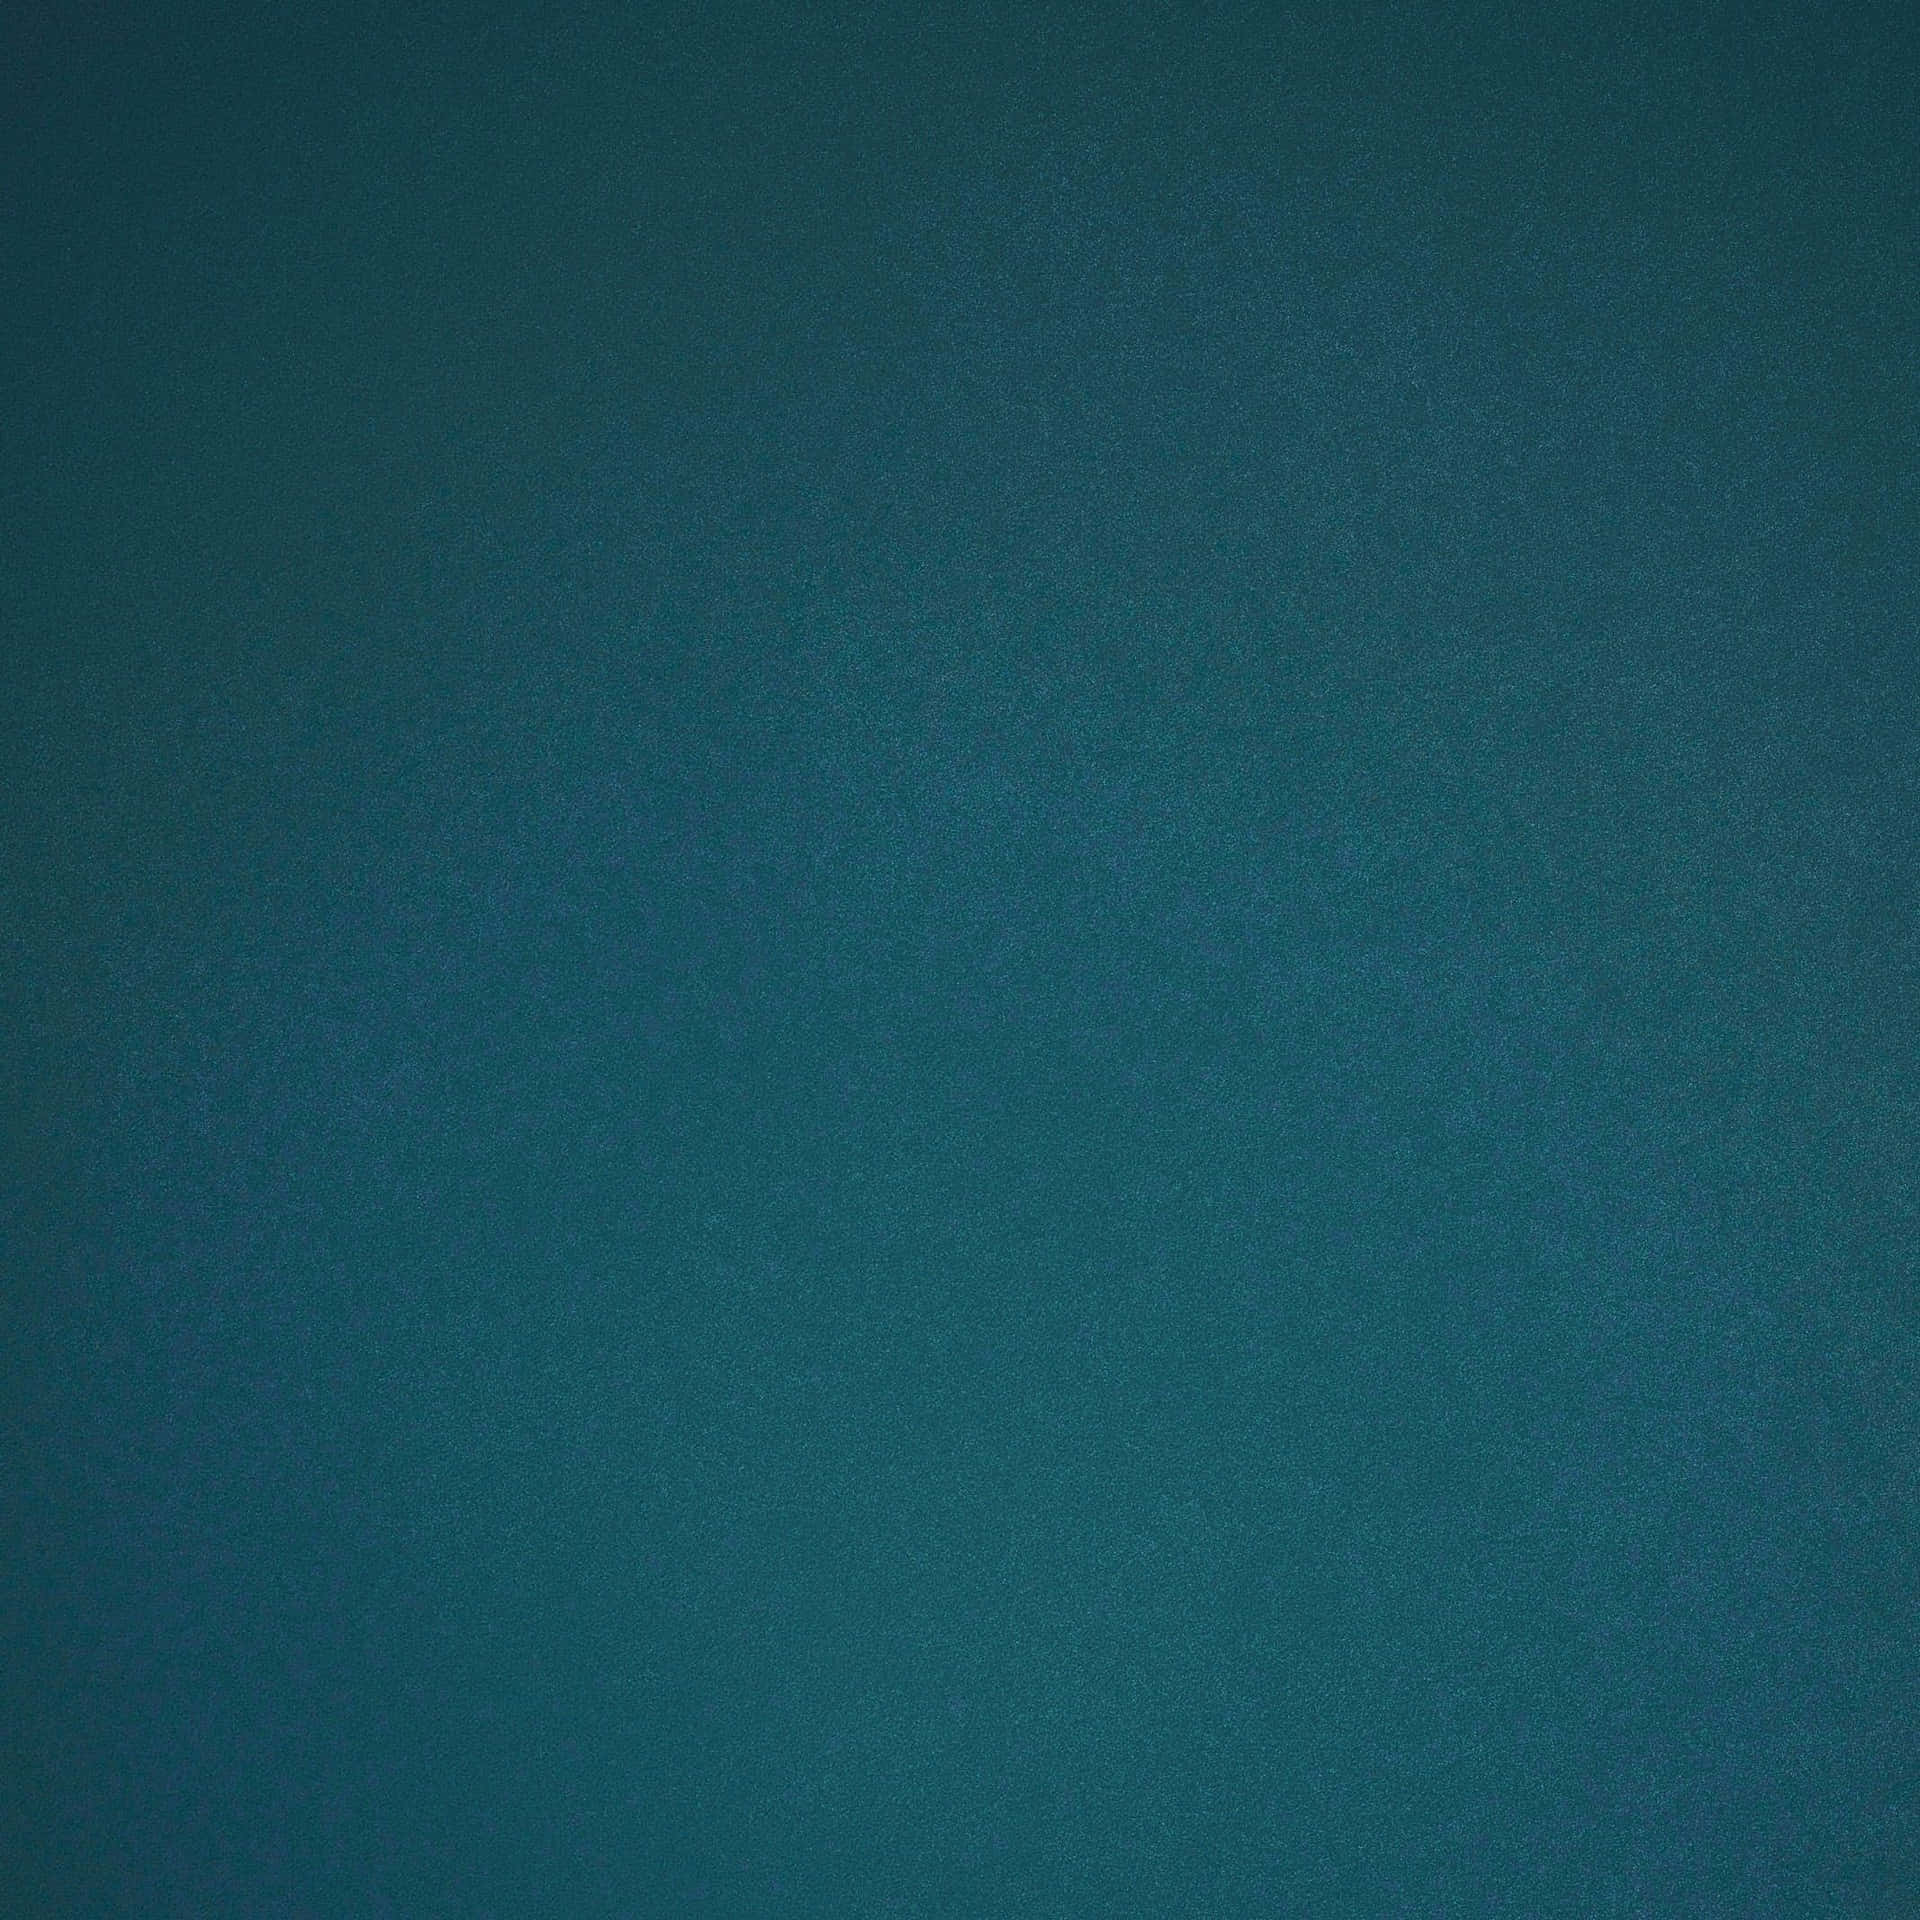 A Dark Teal Abstract Background